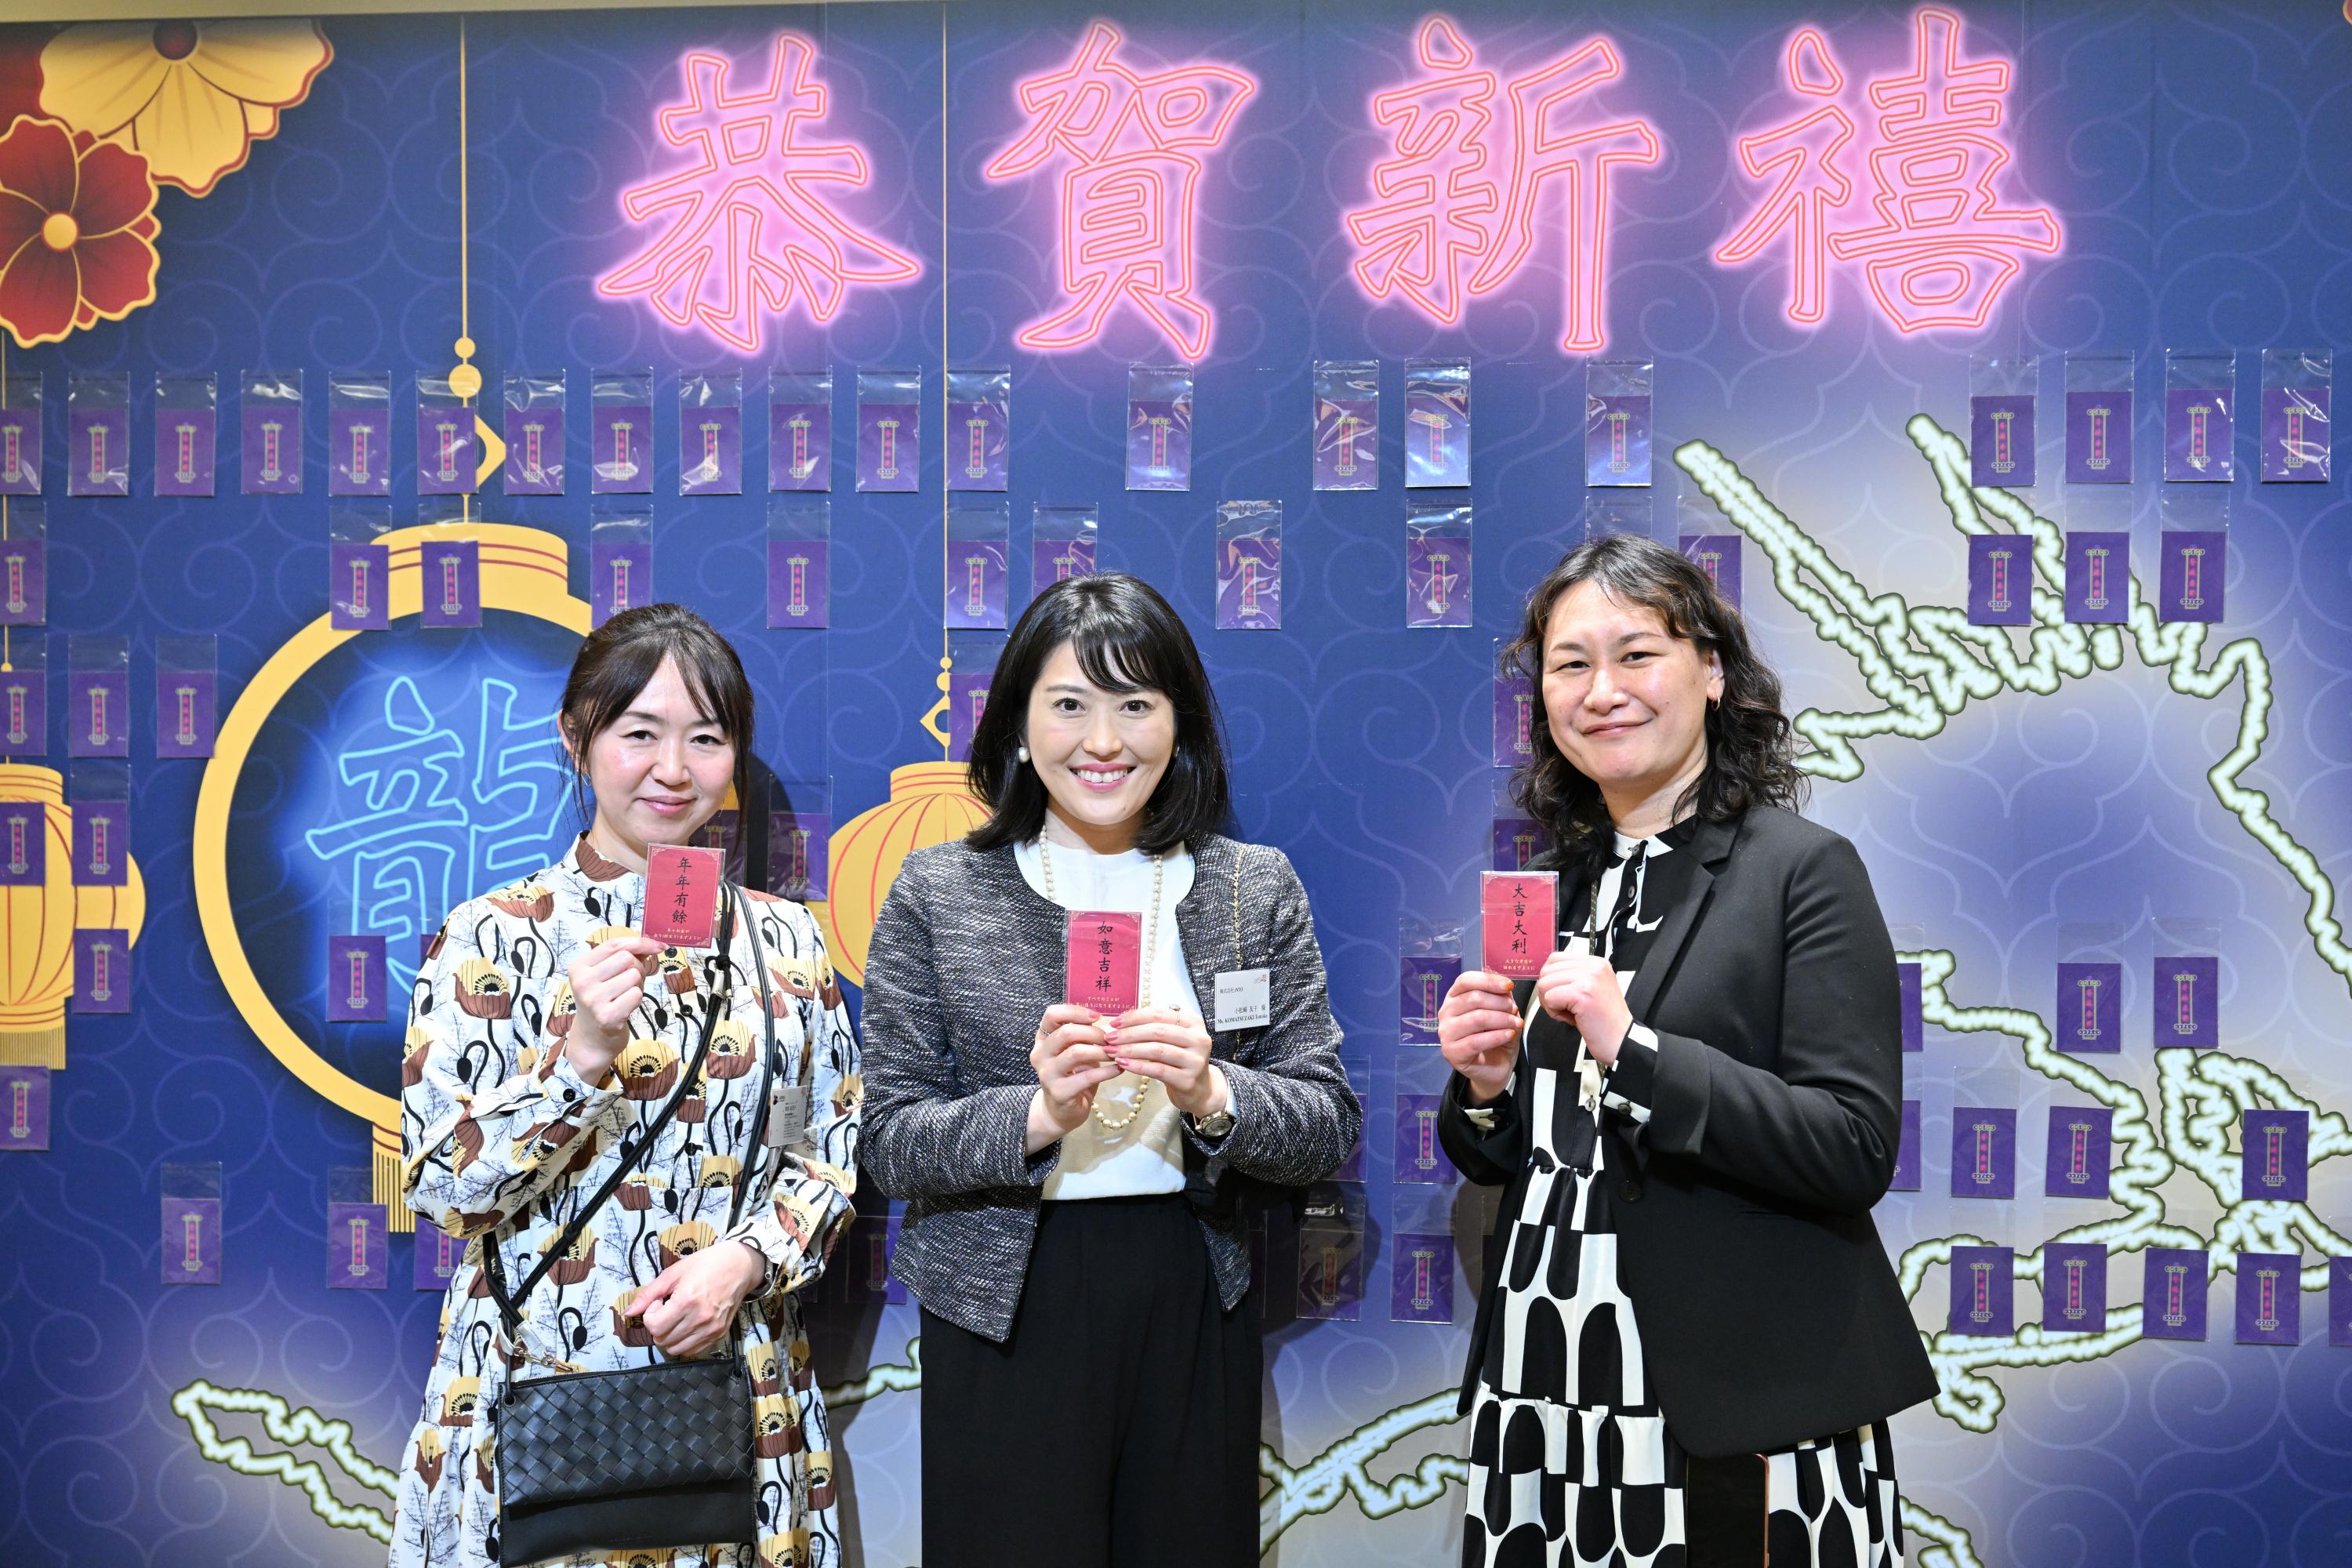 Fai chun cards were distributed at the spring reception held by the Hong Kong Economic and Trade Office (Tokyo) in Tokyo today (February 21) to spread the joy of the Chinese New Year.